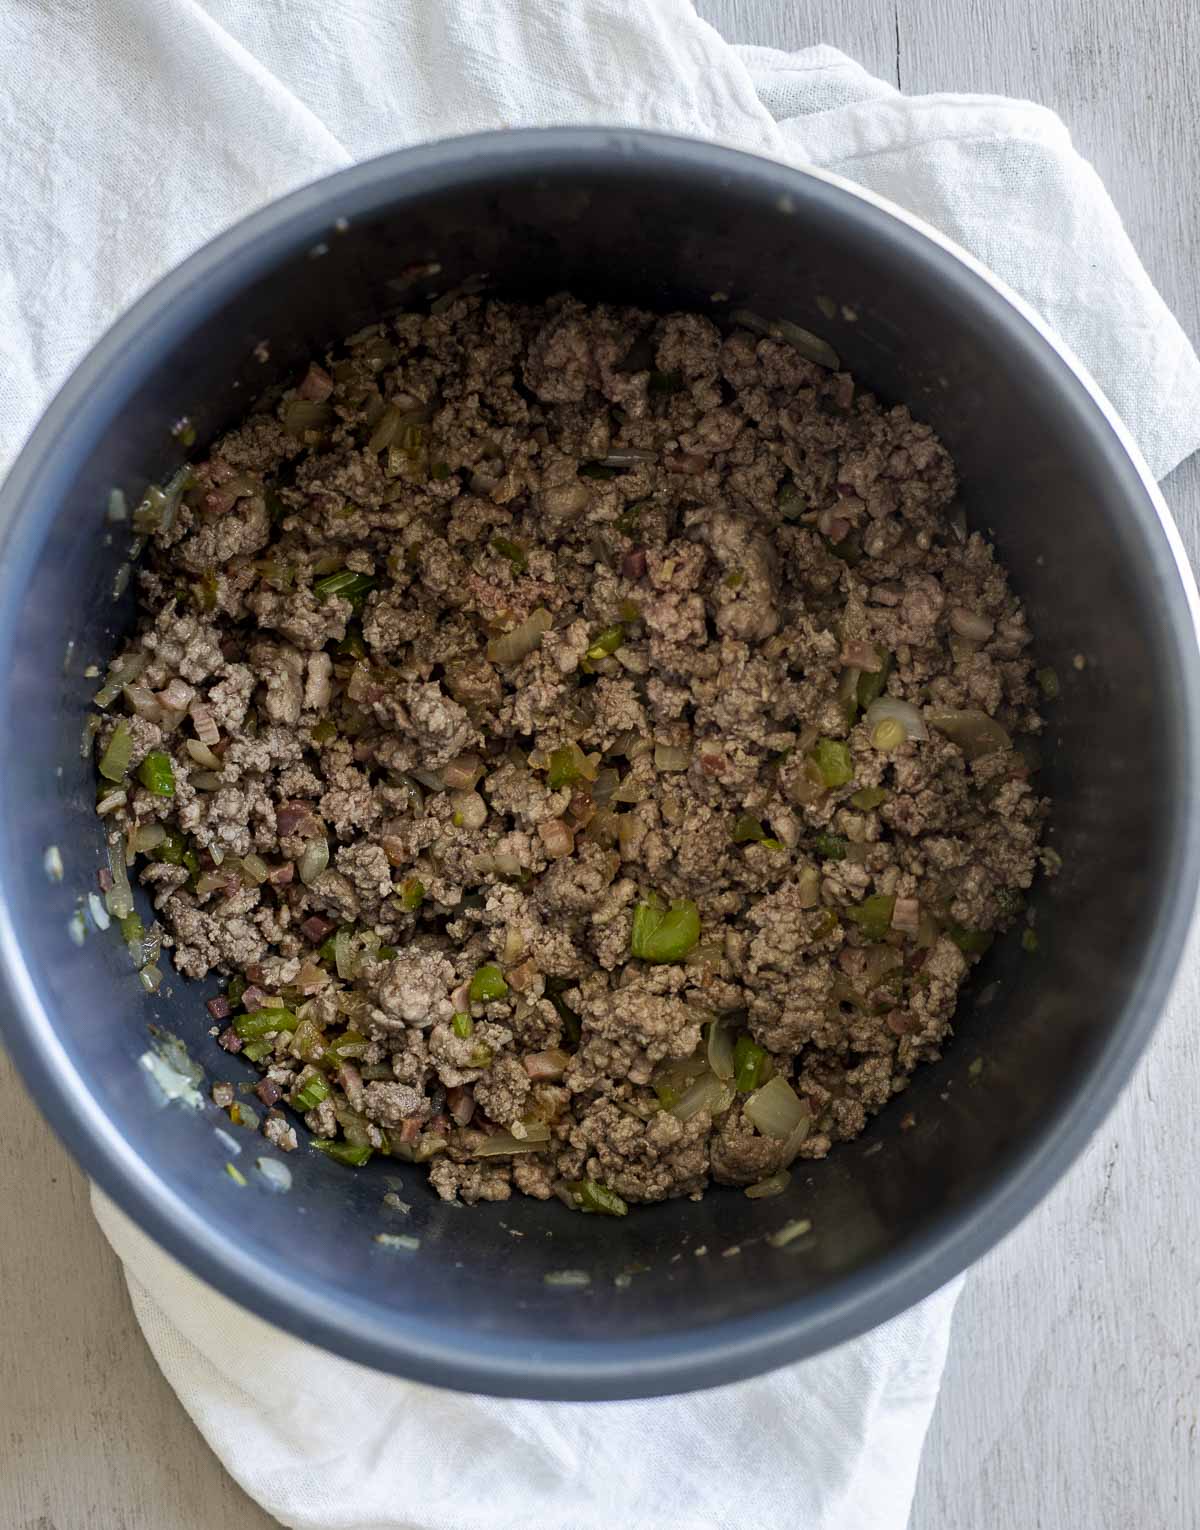 Ground meat browned with the veggie mixture in the Instant Pot insert.